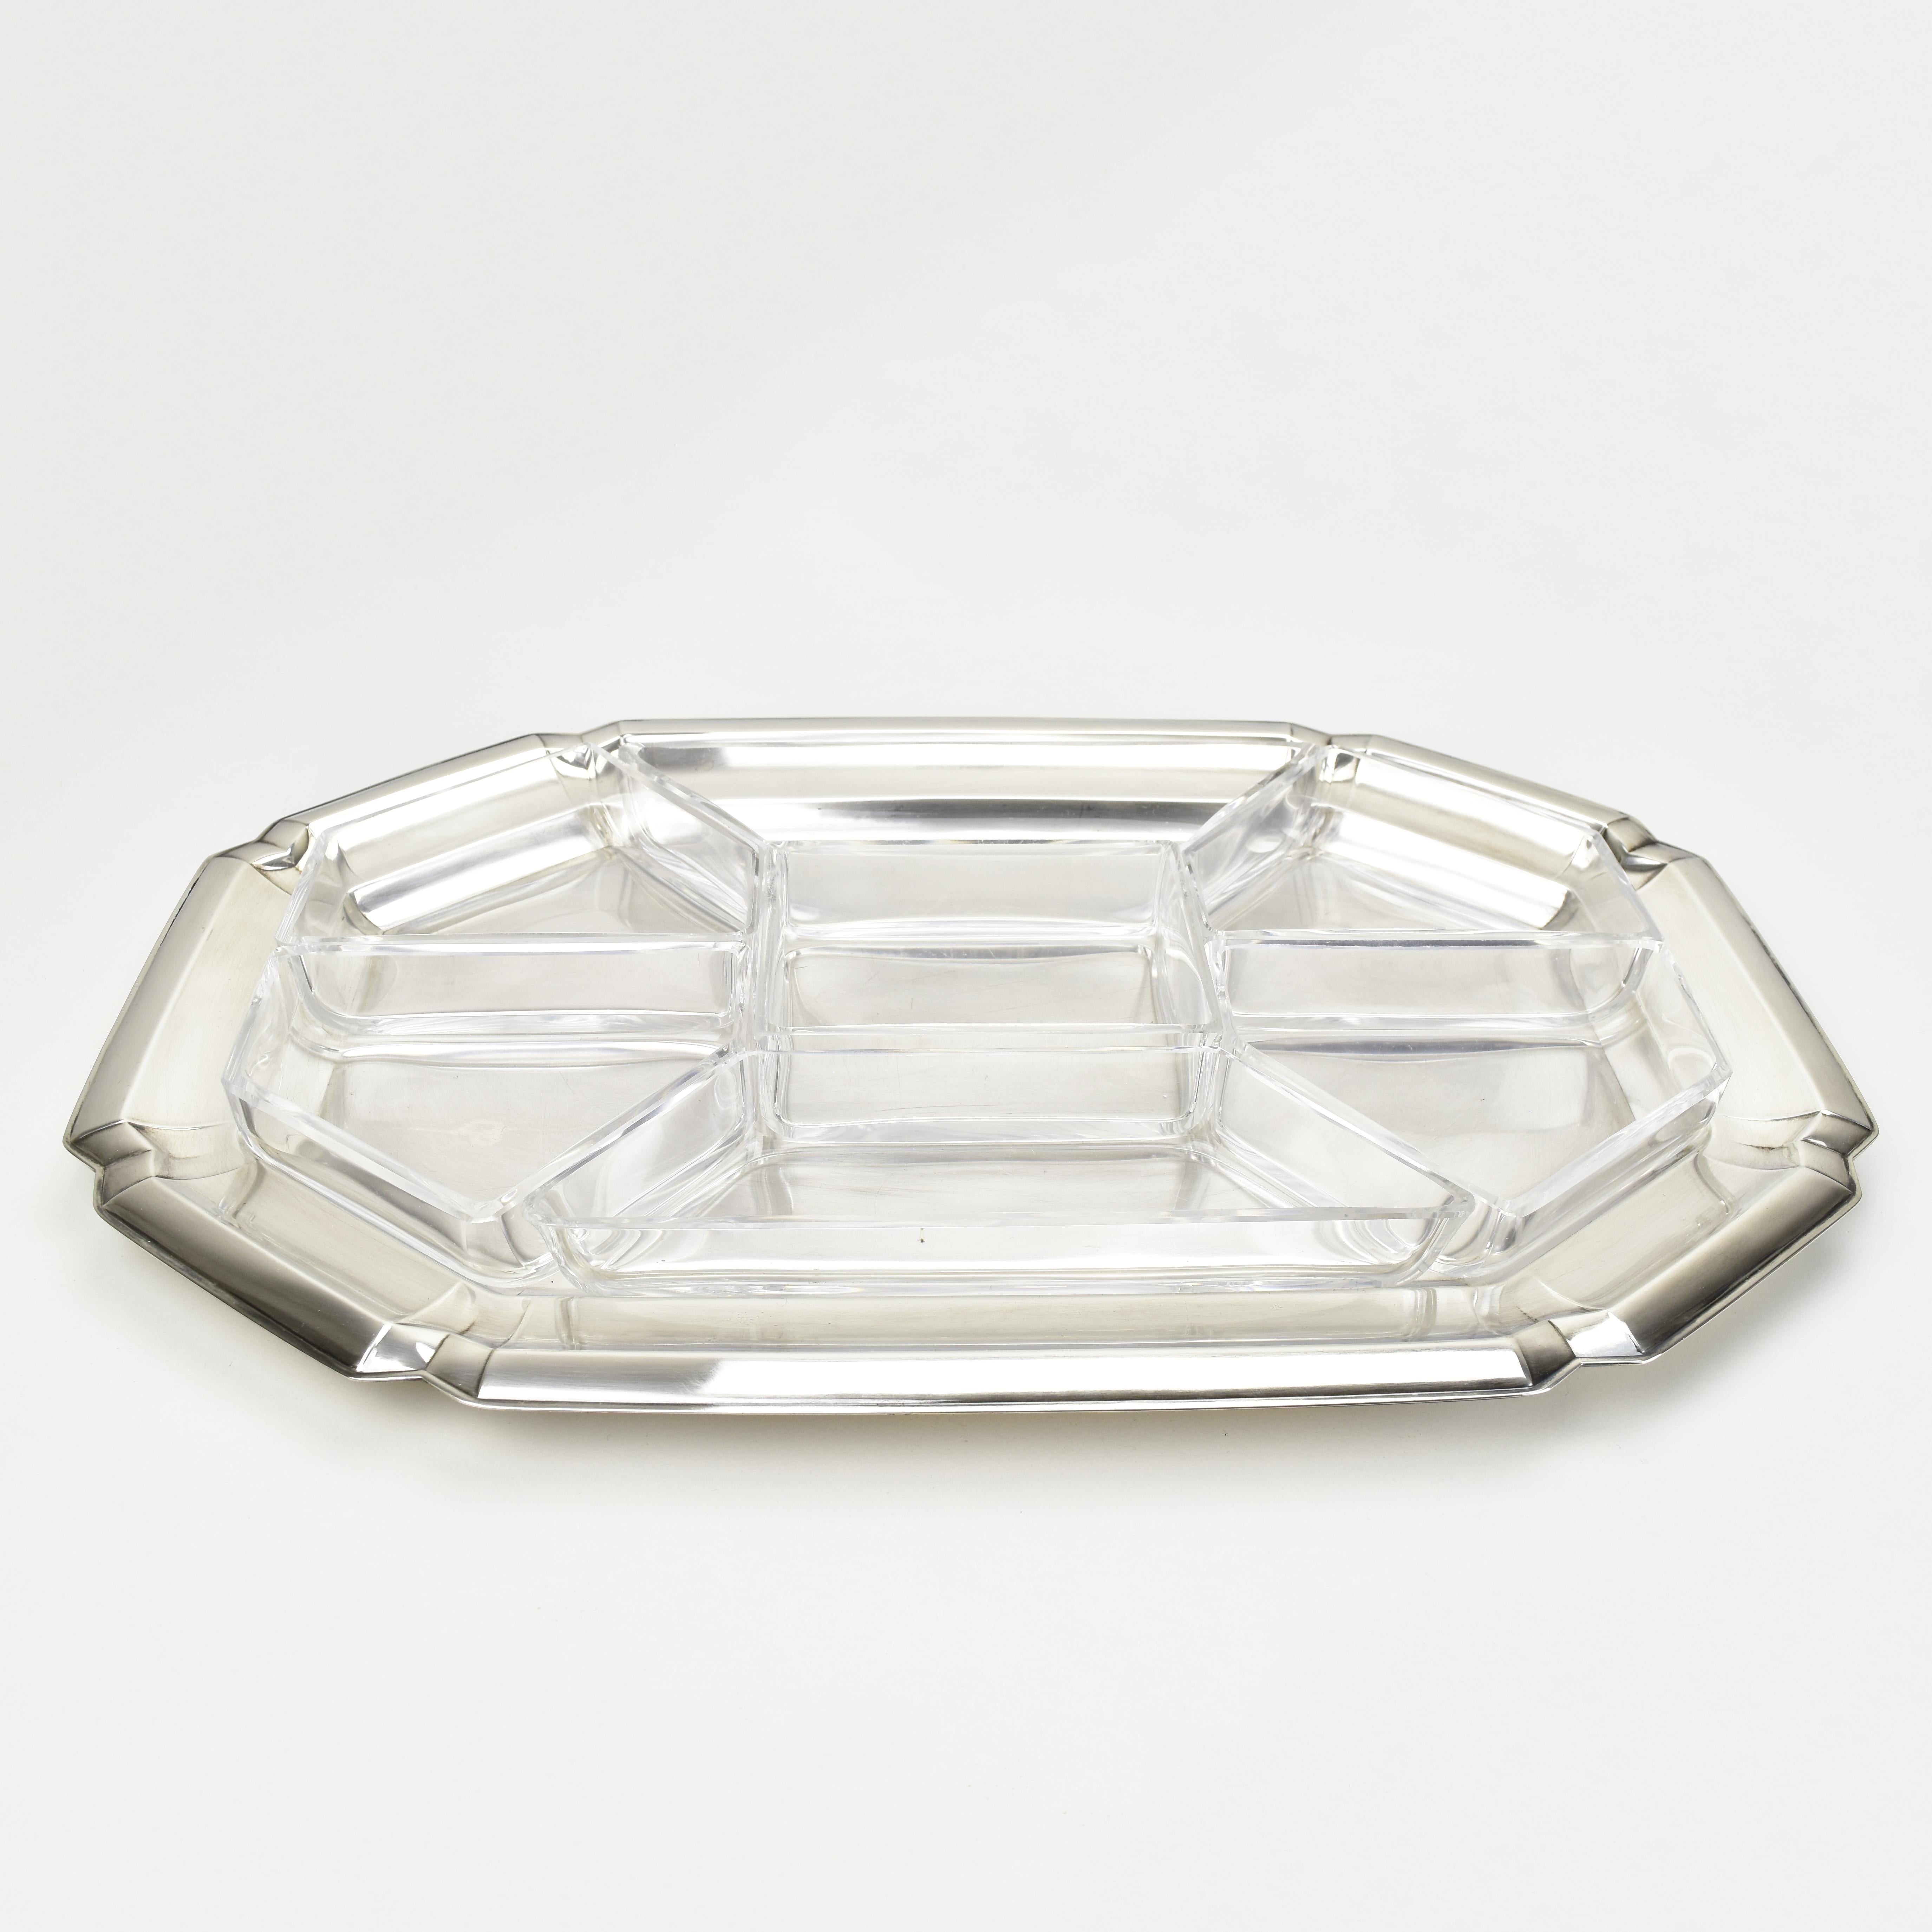 Large Art Deco Cabaret Bar Snack Tray by Quist Silverplate & Cut Crystal Liners In Good Condition For Sale In Bad Säckingen, DE